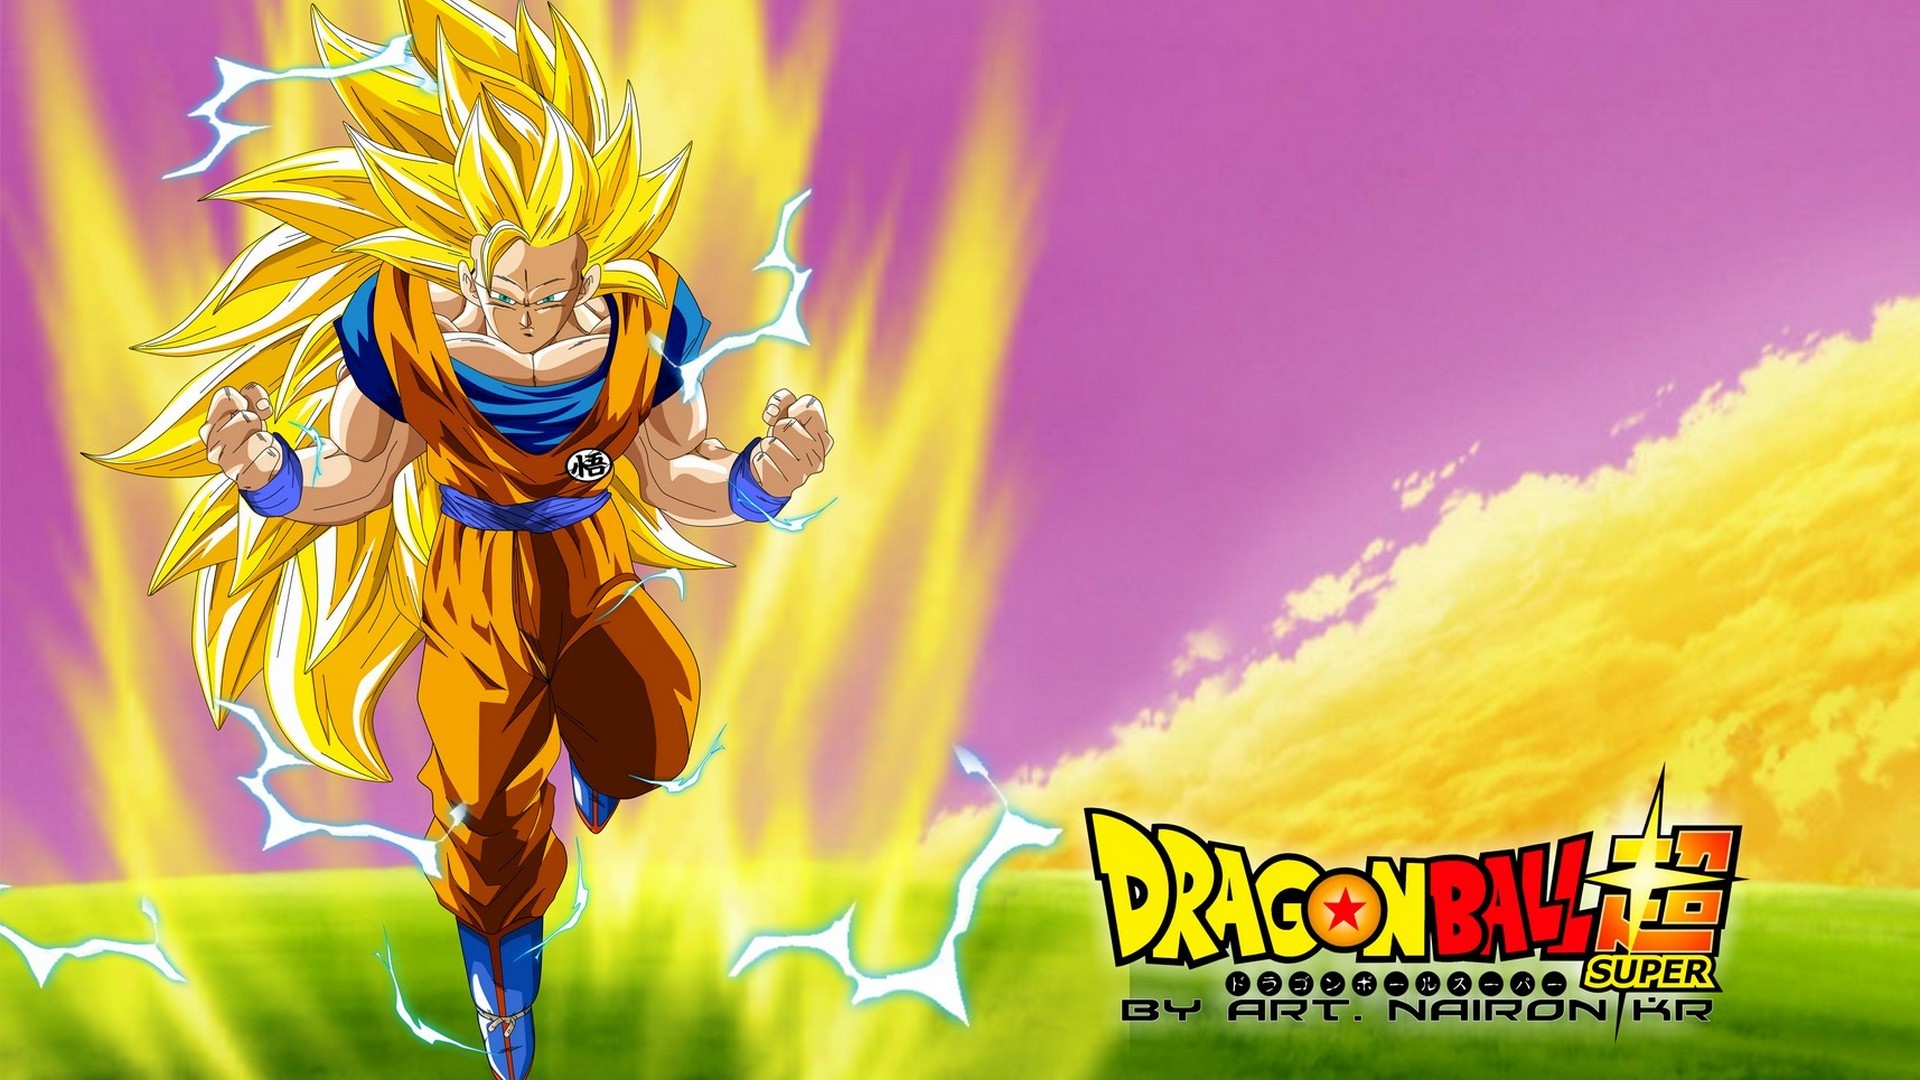 Goku SSJ3 Wallpaper For Desktop with image resolution 1920x1080 pixel. You can use this wallpaper as background for your desktop Computer Screensavers, Android or iPhone smartphones